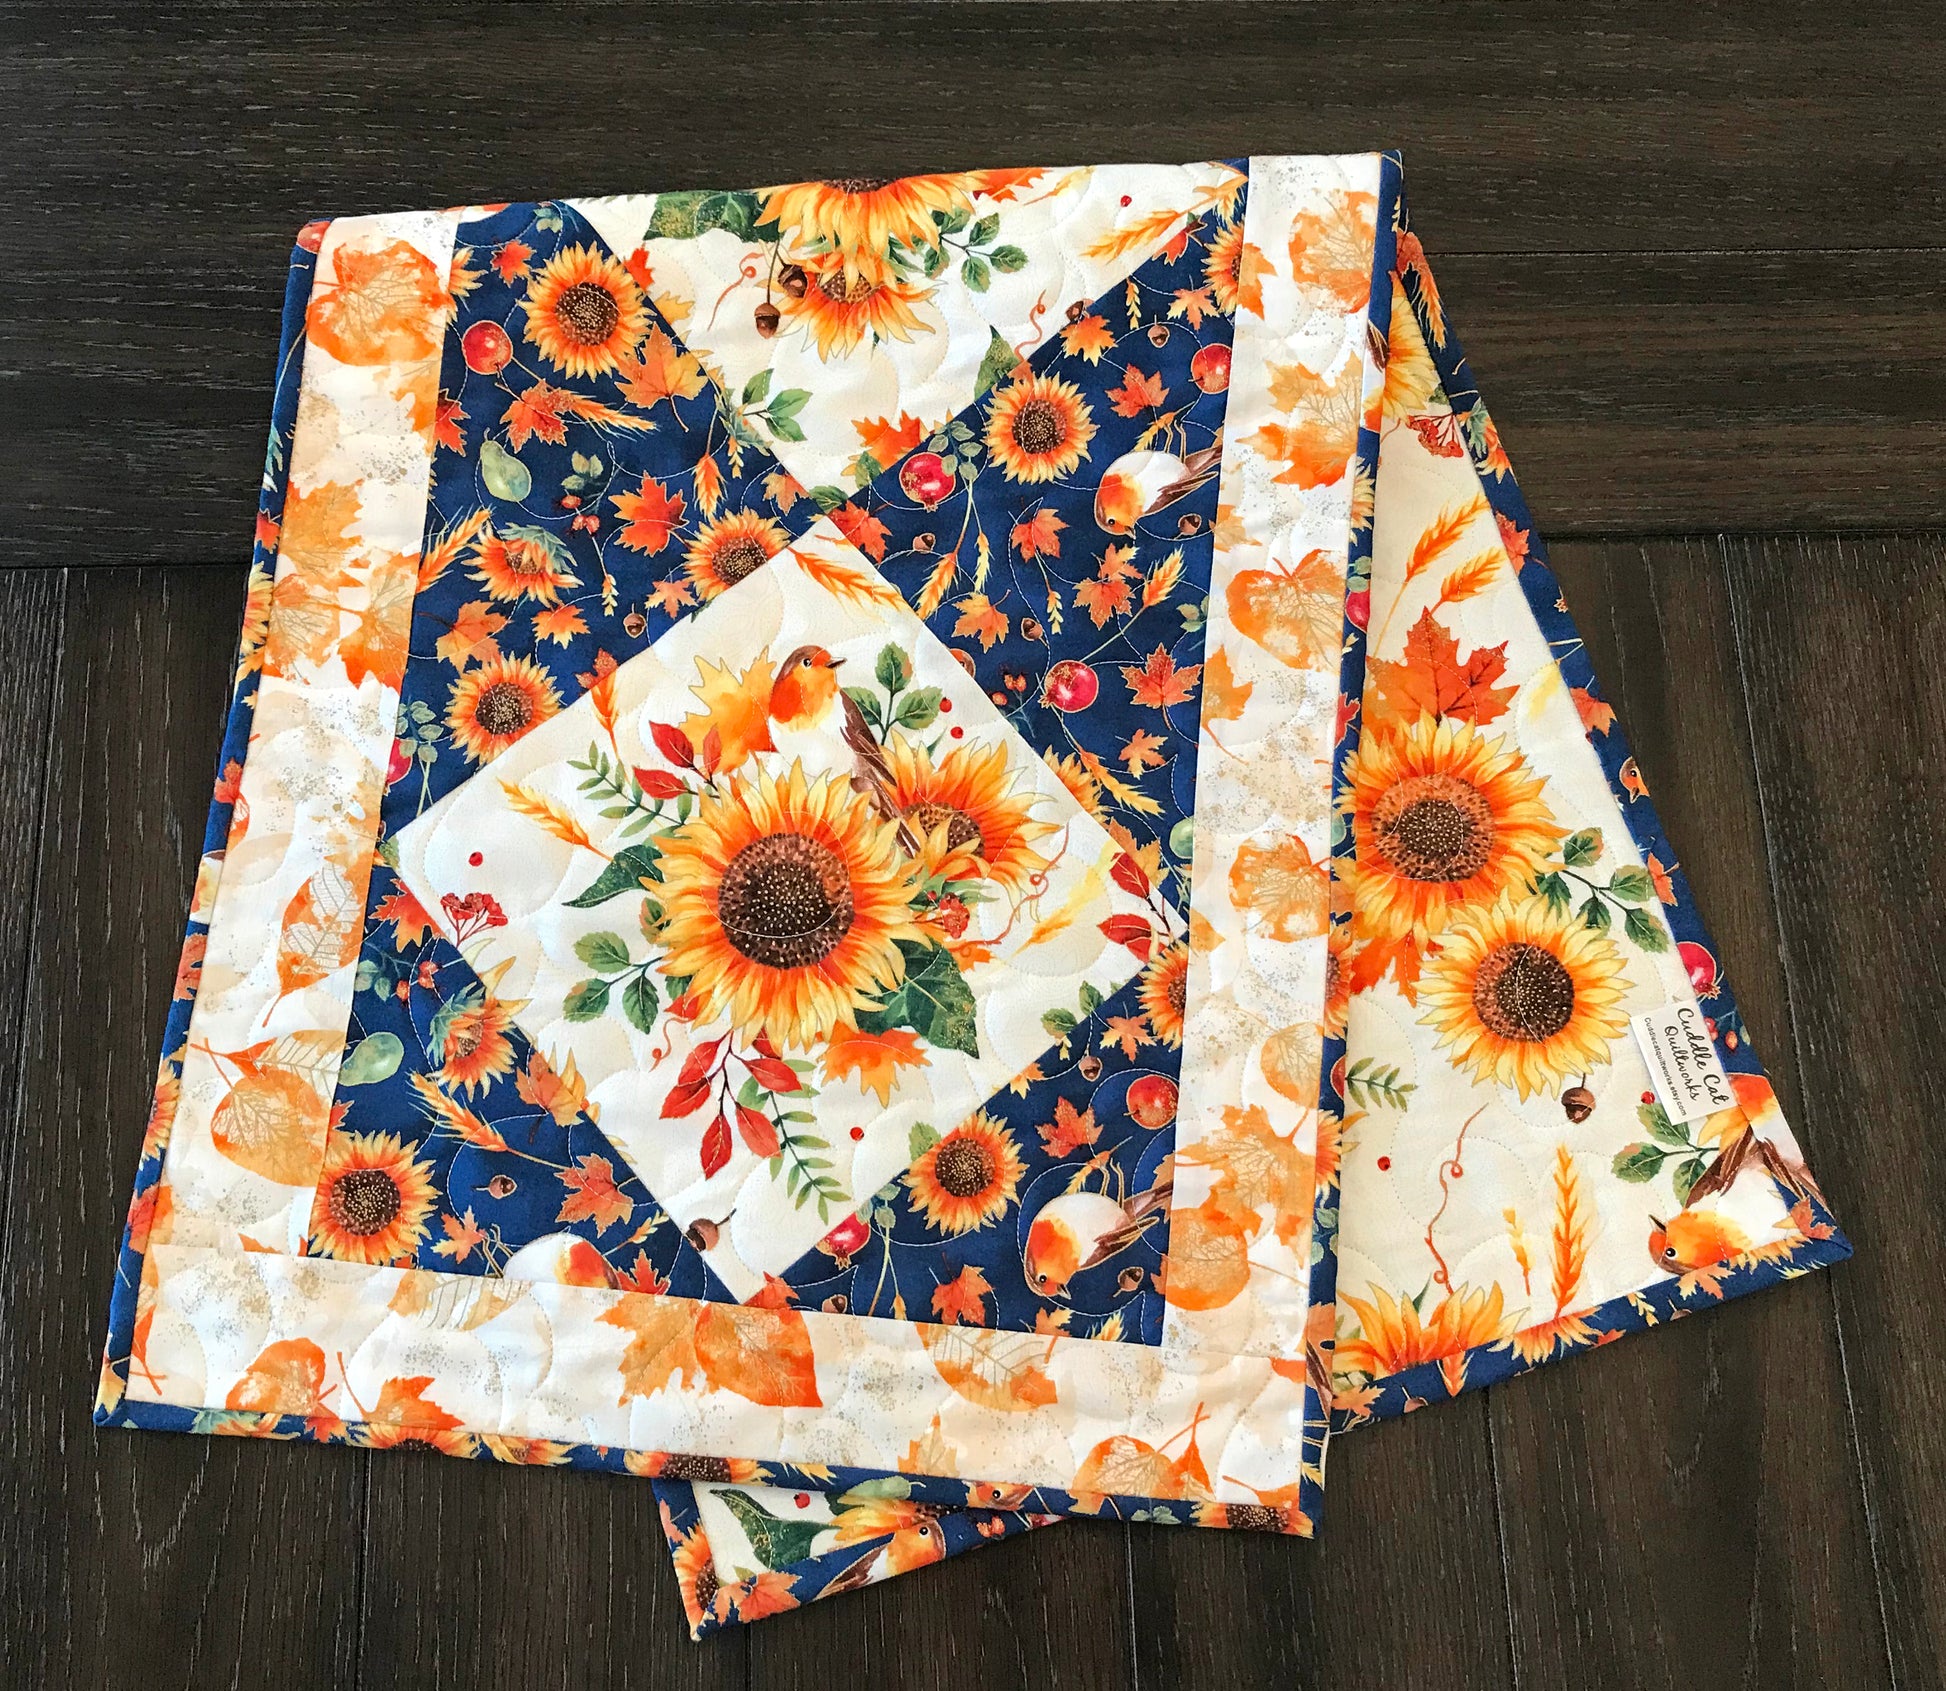 Sunflower themed fall table runner with a center diamond pattern of sunflowers surrounded by gold leaves and dark blue accents displayed on a table